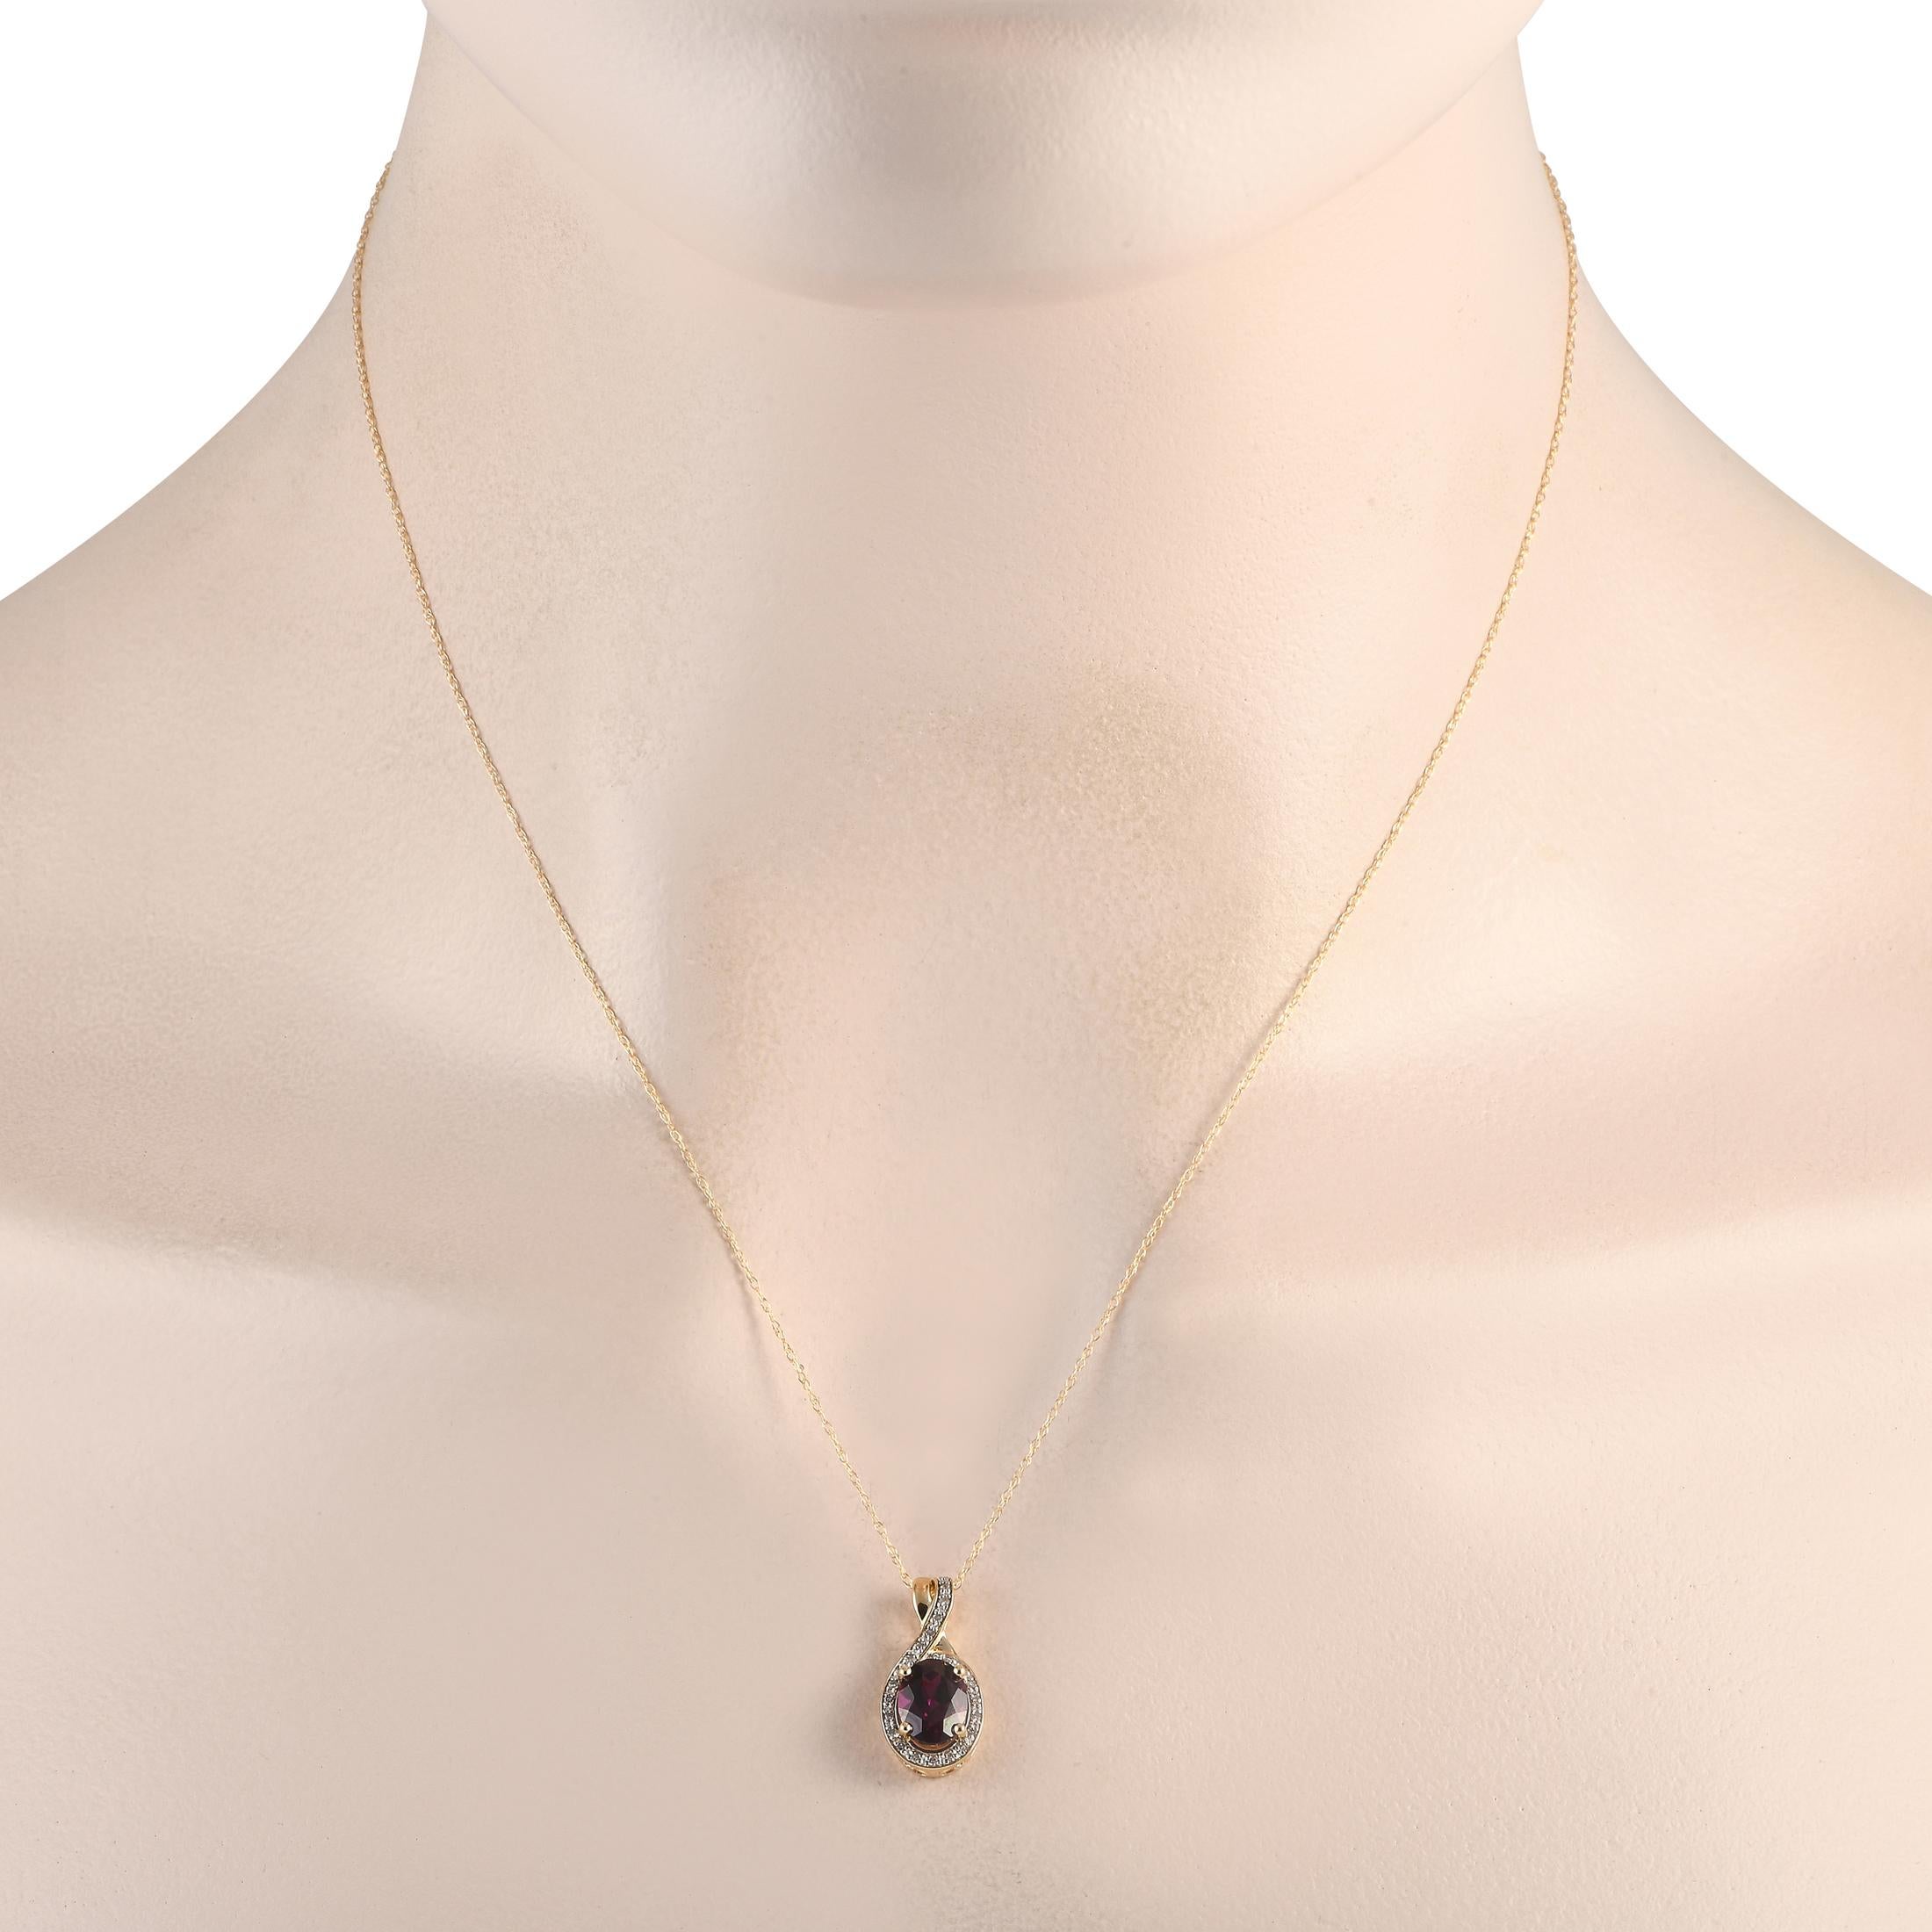 A stunning garnet gemstone surrounded by diamonds totaling 0.11 carats makes a statement on this timeless necklace. Crafted from 14K yellow gold, the pendant measures 0.75 long by 0.45 wide and is suspended from an 18 chain.This jewelry piece is